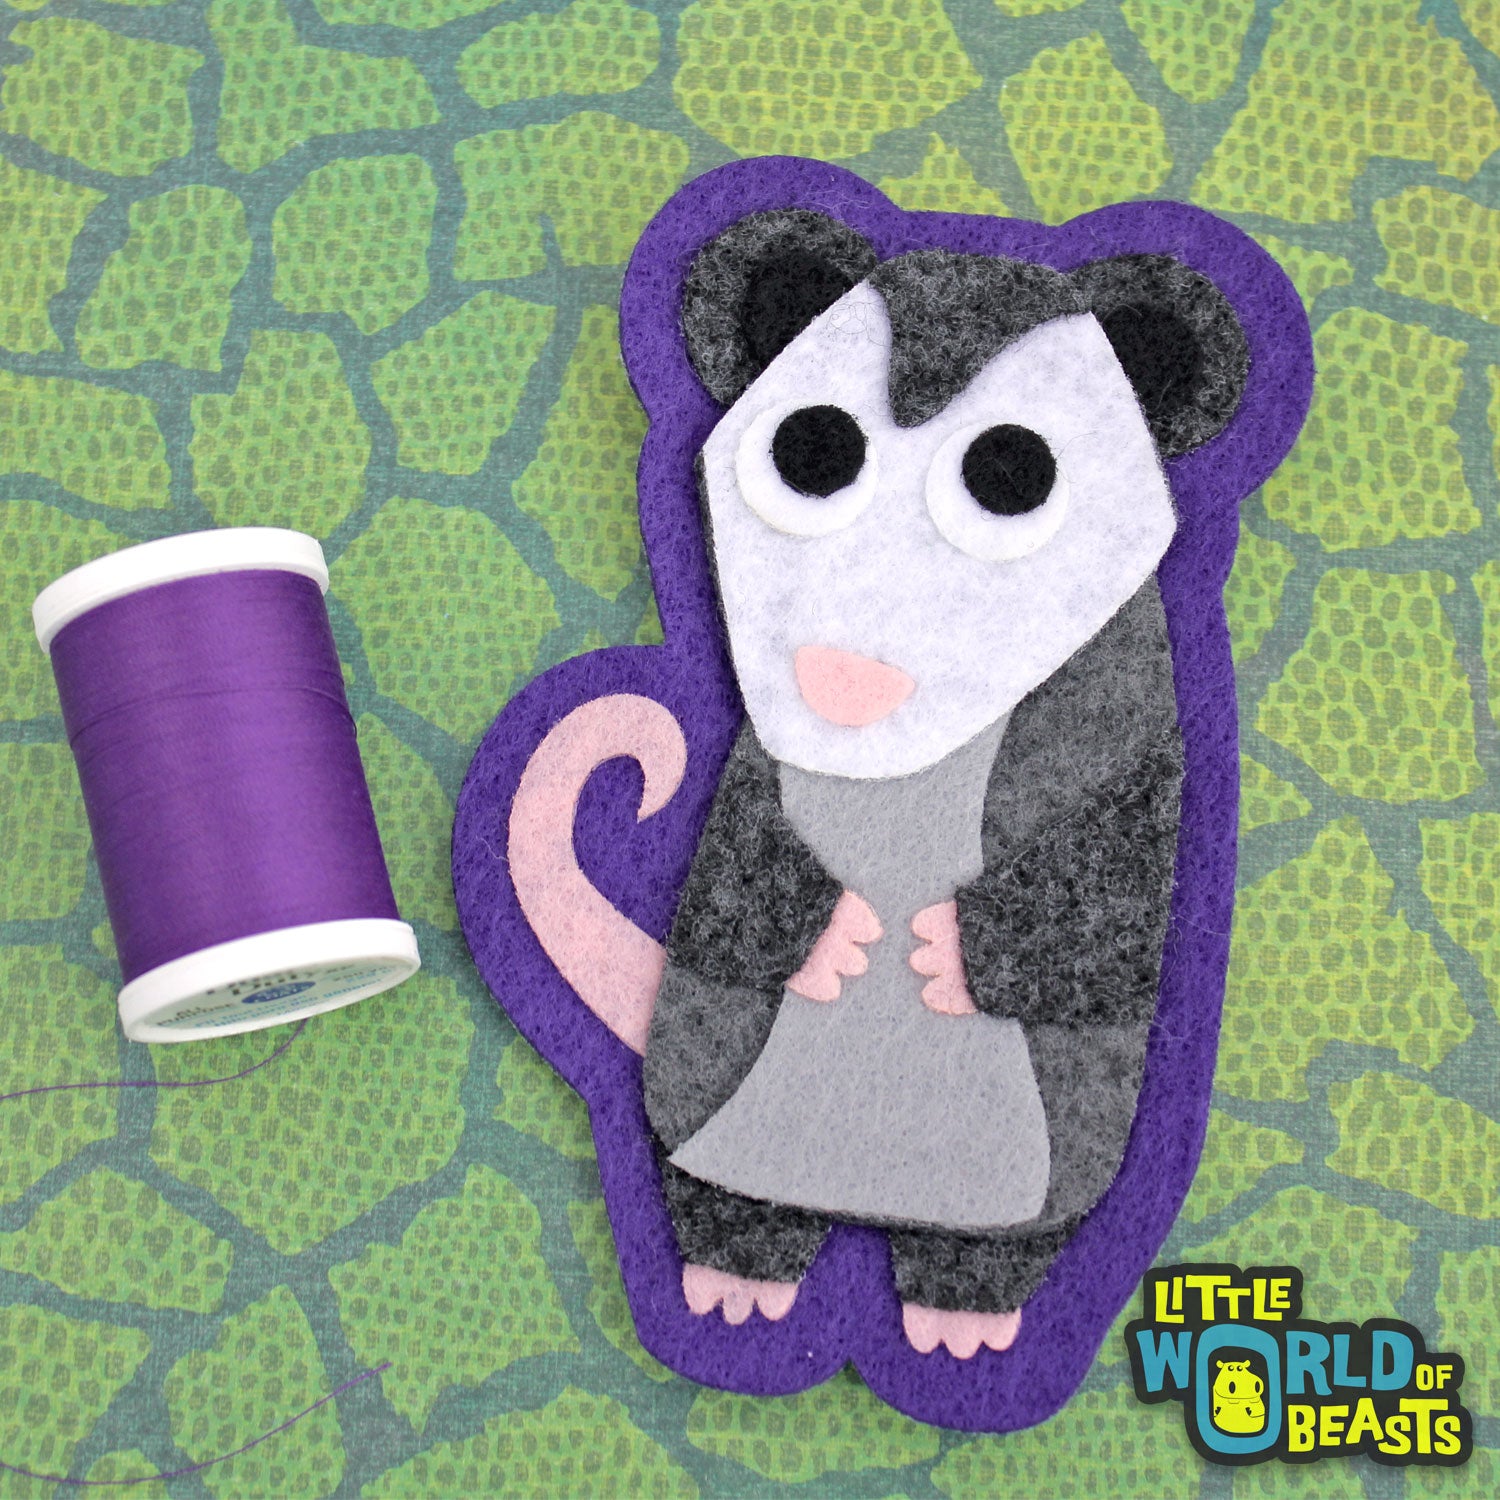 Quigley the Opossum - Felt Animal Patch - Sew On or Iron On